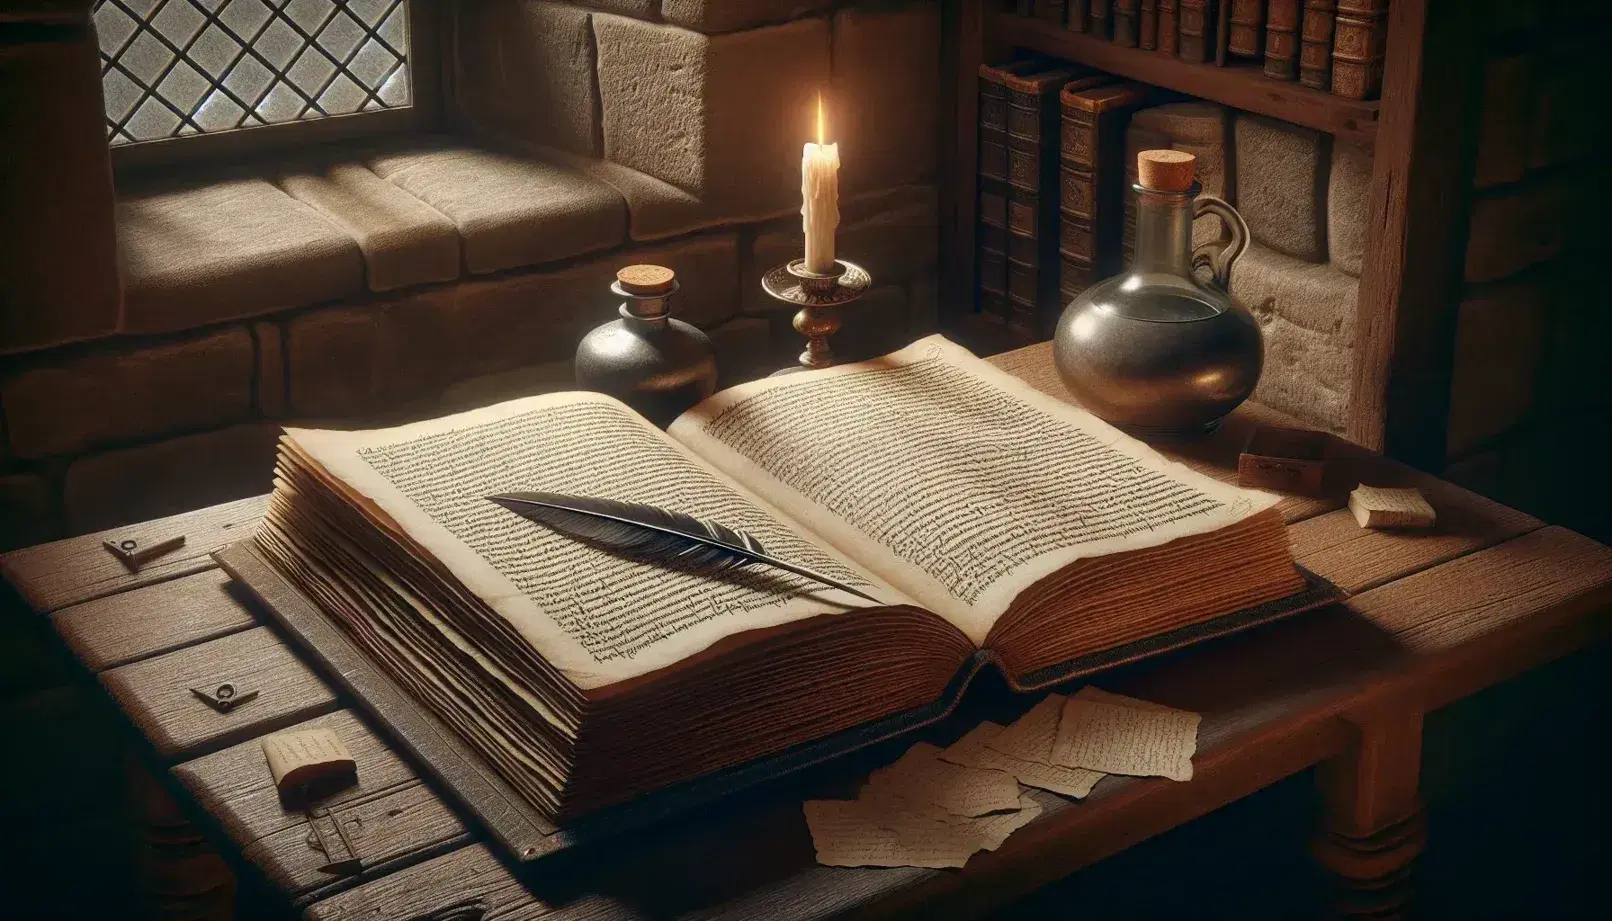 Dimly lit medieval study with an open antique book on an oak table, quill in inkwell, candlelight, glass bottle, loose pages, and a wooden cross in the background.